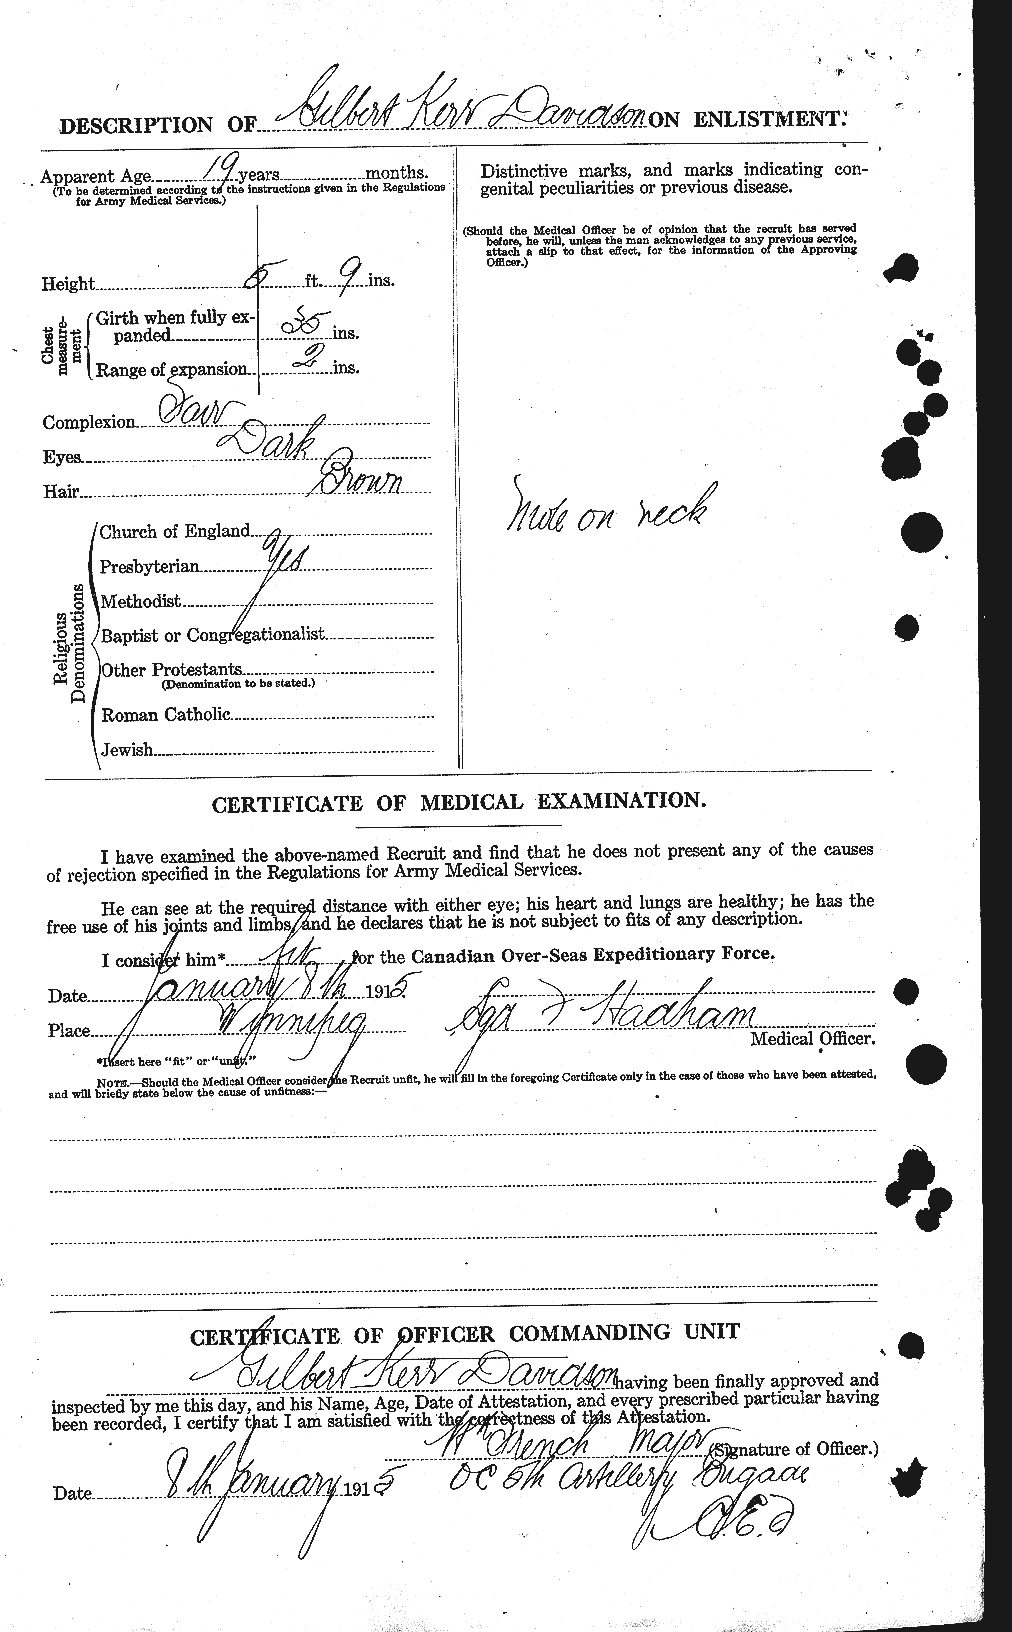 Personnel Records of the First World War - CEF 281162b